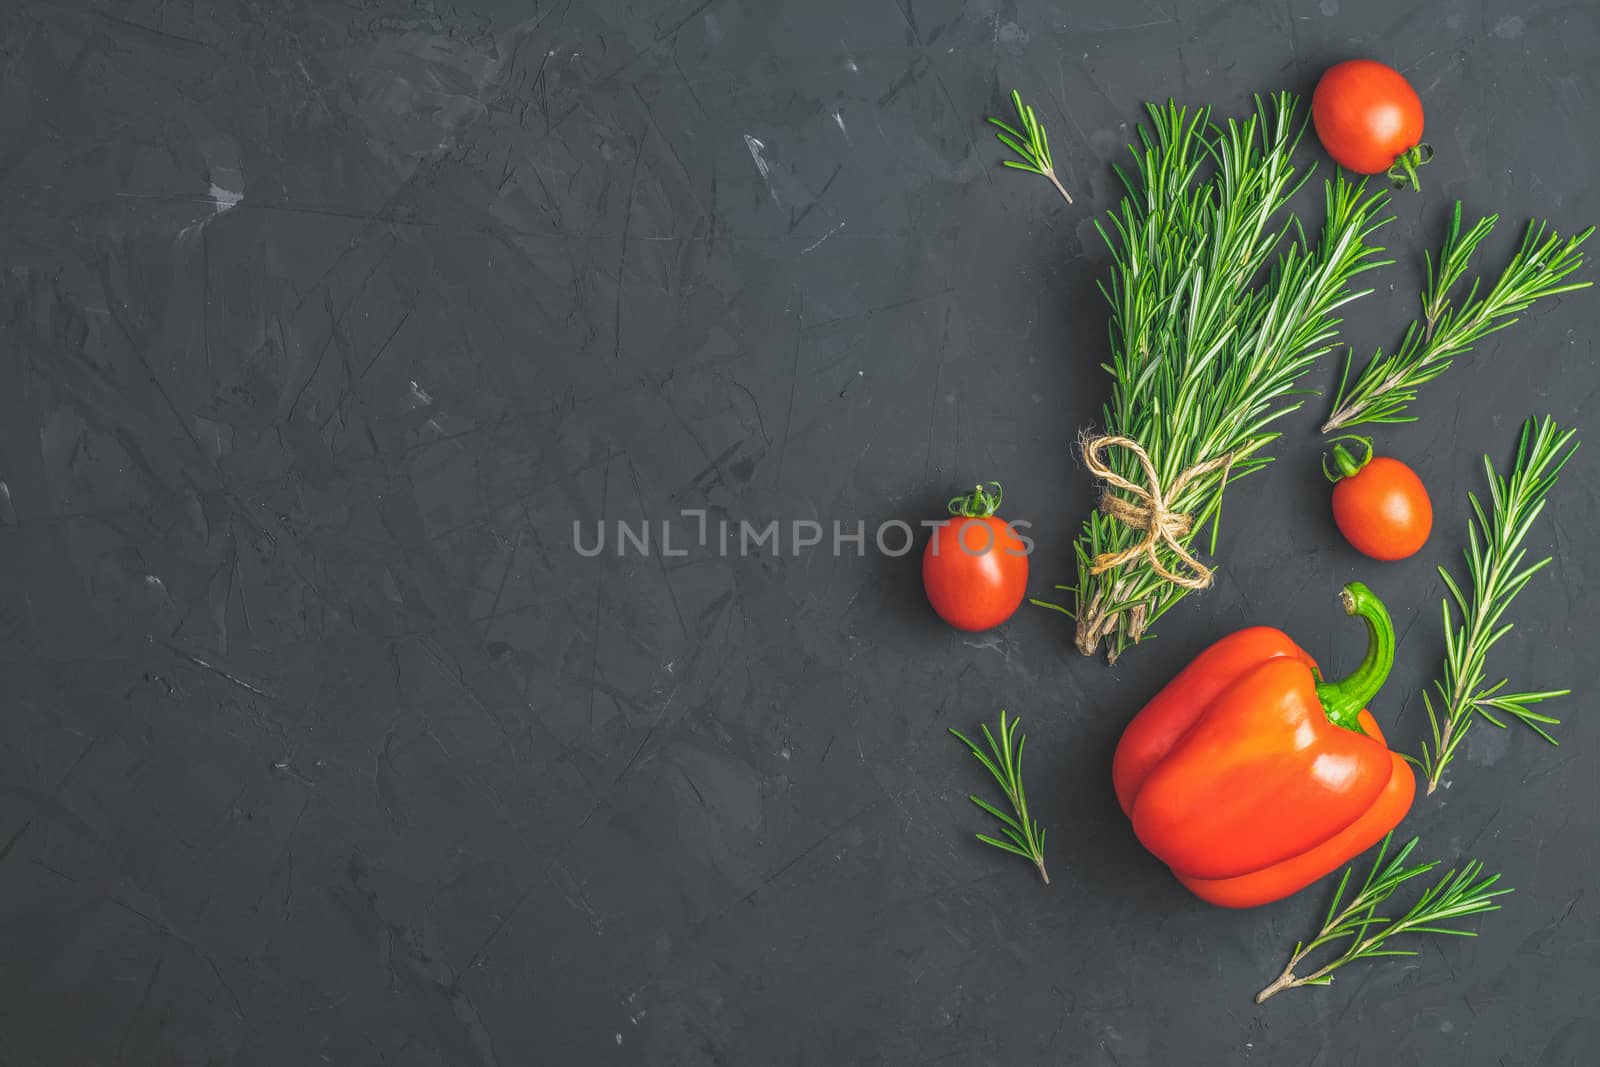 Rosemary bunch of bouquets, raw pepper and cherry tomatoes on black stone concrete textured surface background. Top view with copy space for your text.